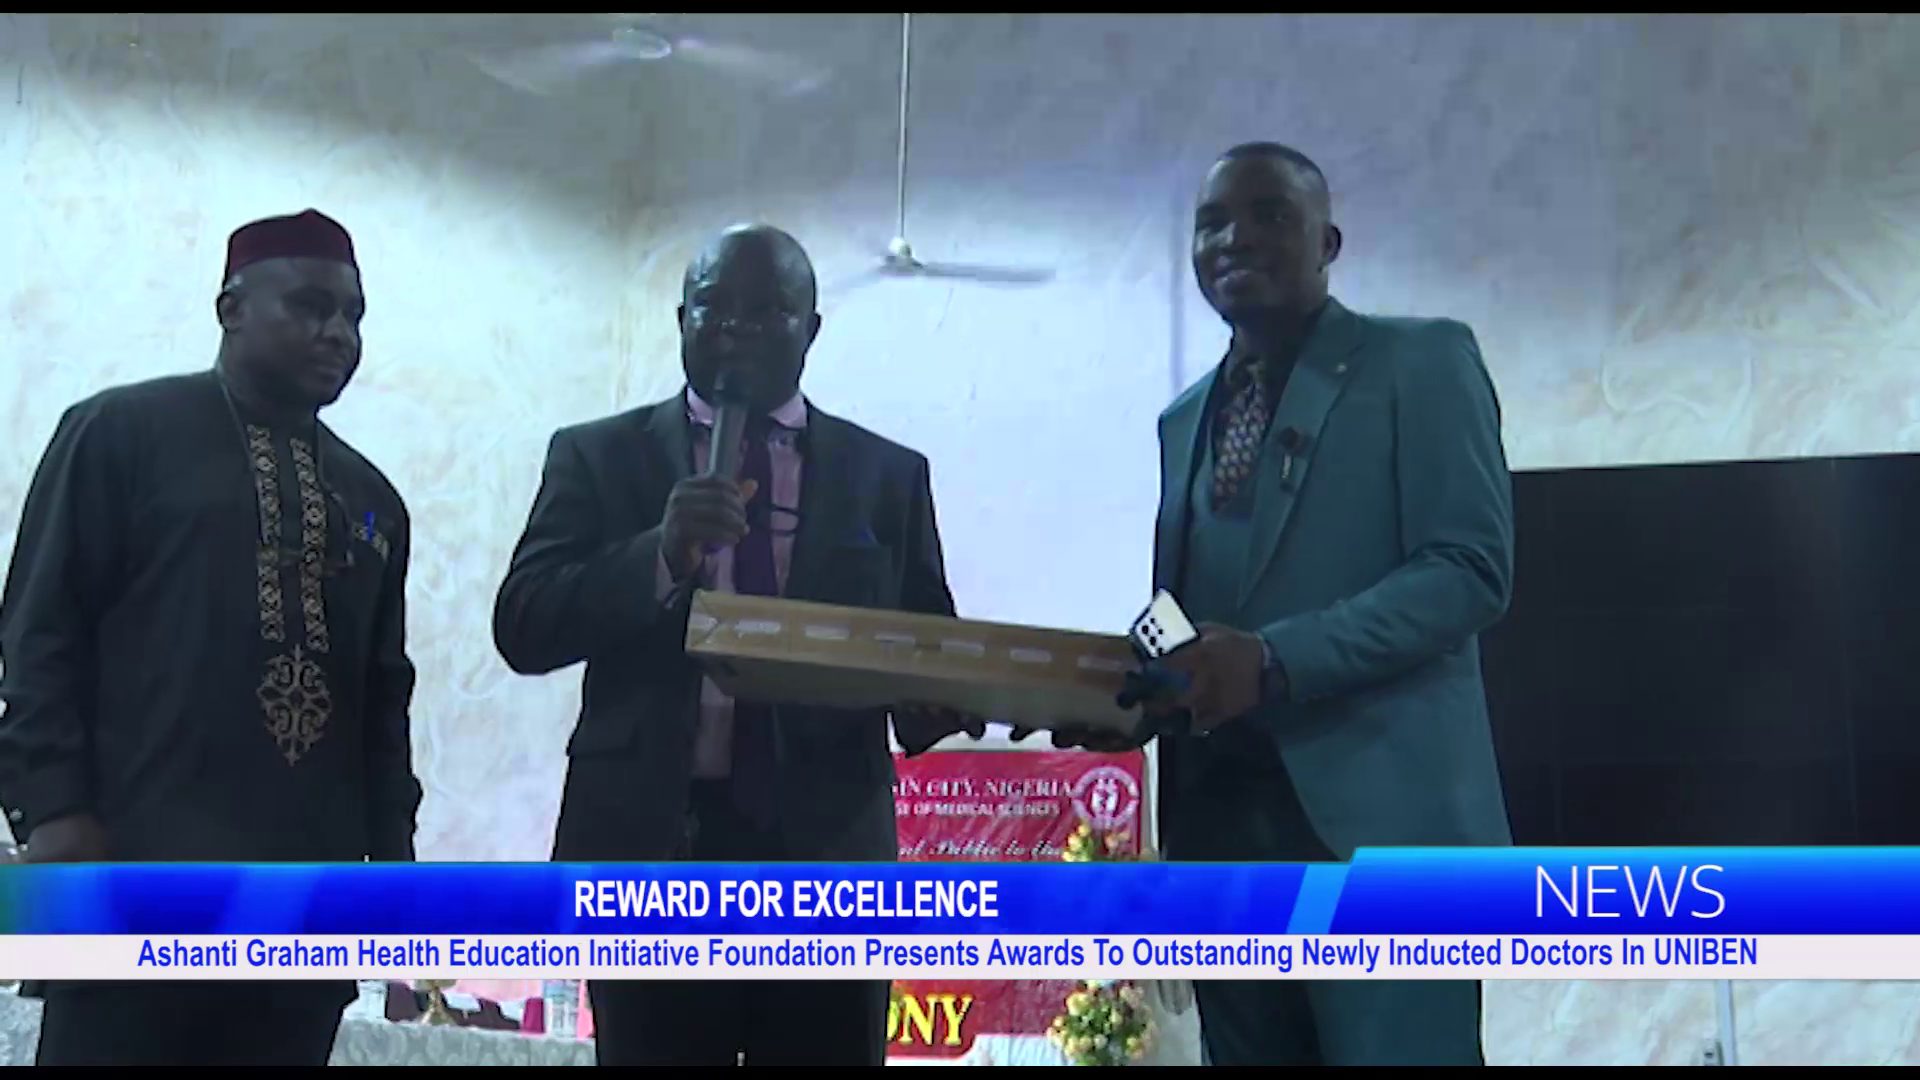 Ashanti Graham Health Education Initiative Foundation Presents Awards To Outstanding Newly Inducted Doctors In UNIBEN